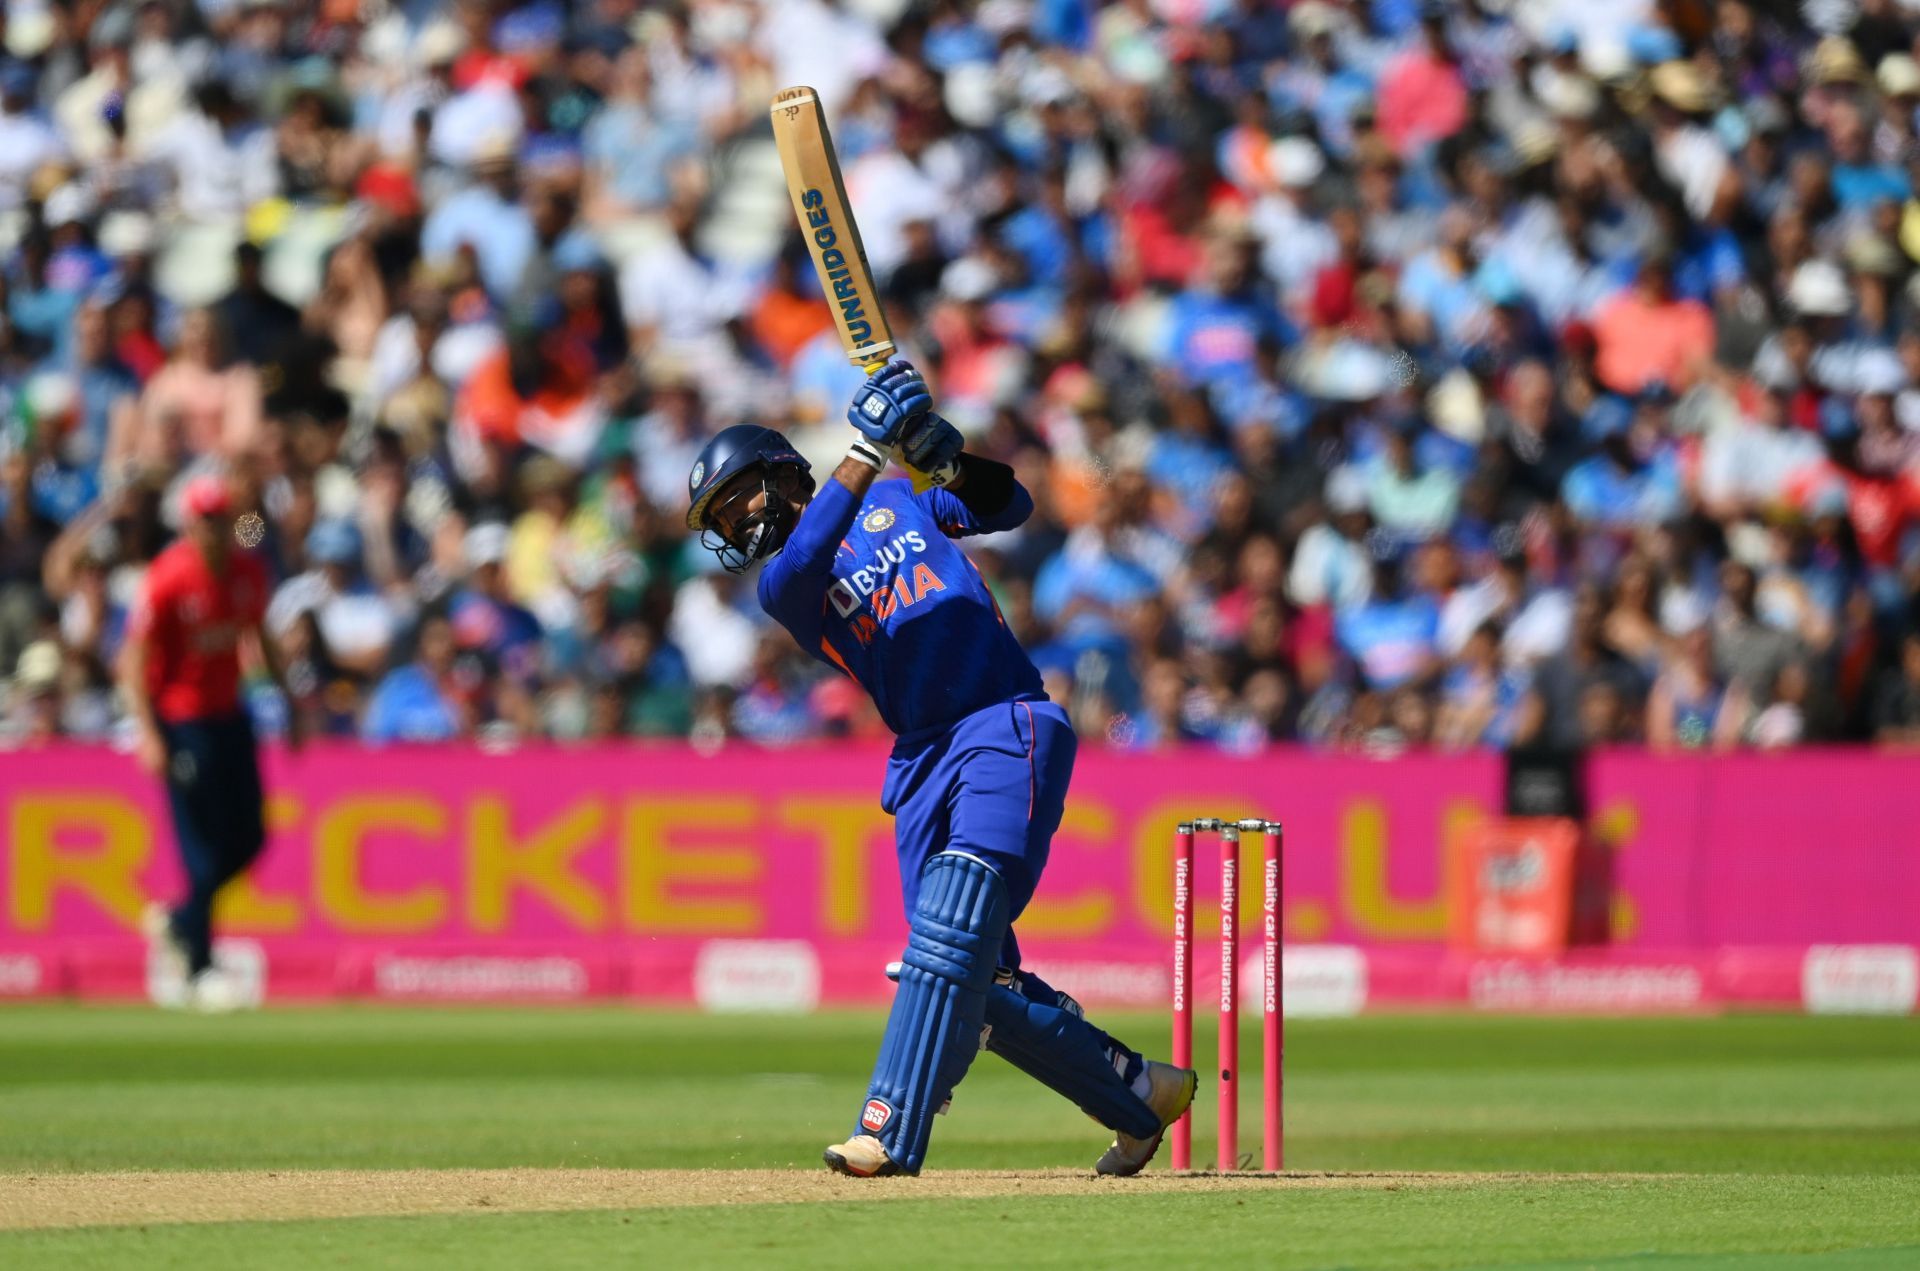 Dinesh Karthik scored a meager 29 runs over the three T20Is.